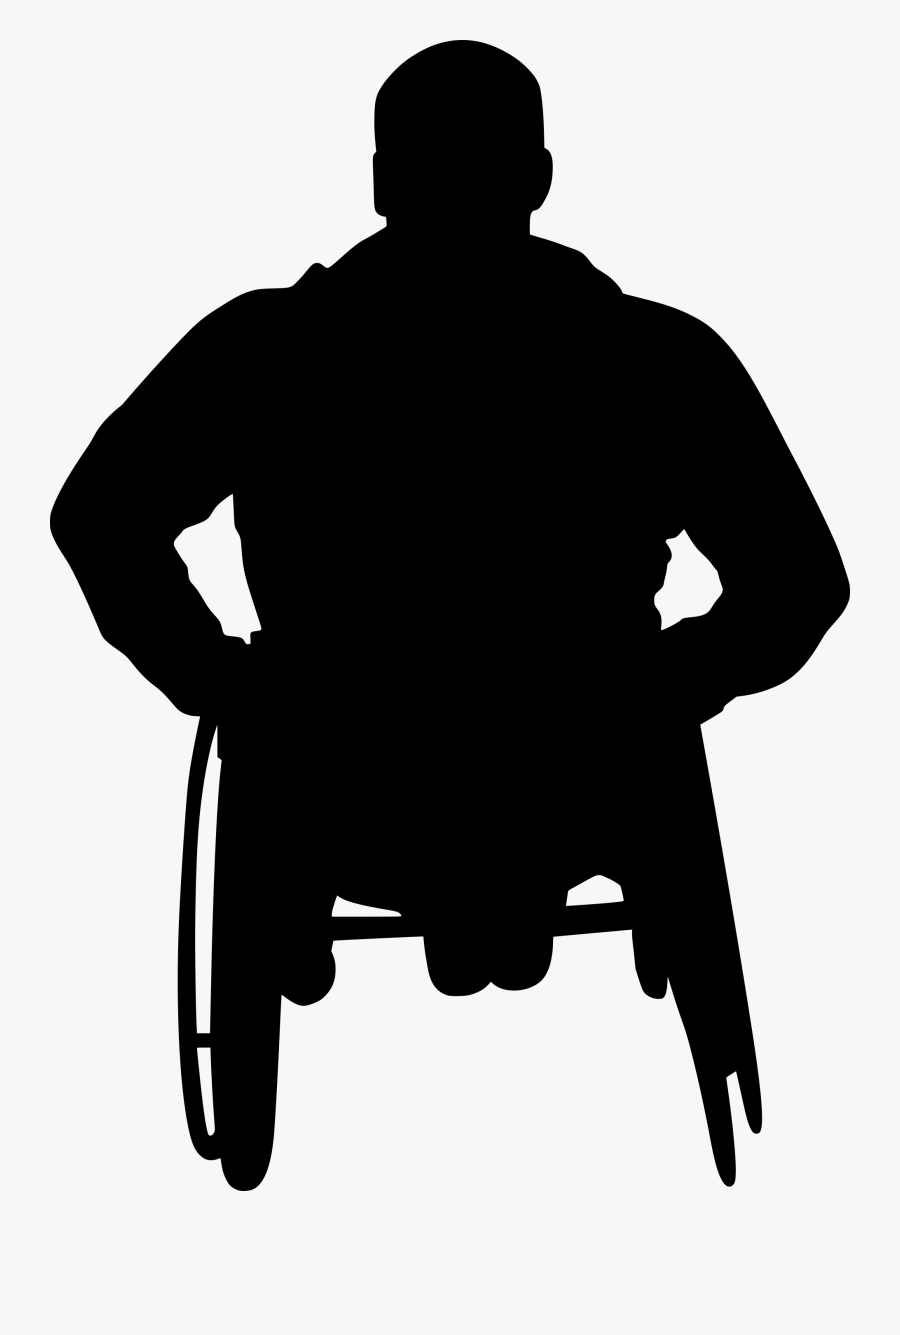 Wheelchair Silhouette Back Png, Transparent Clipart